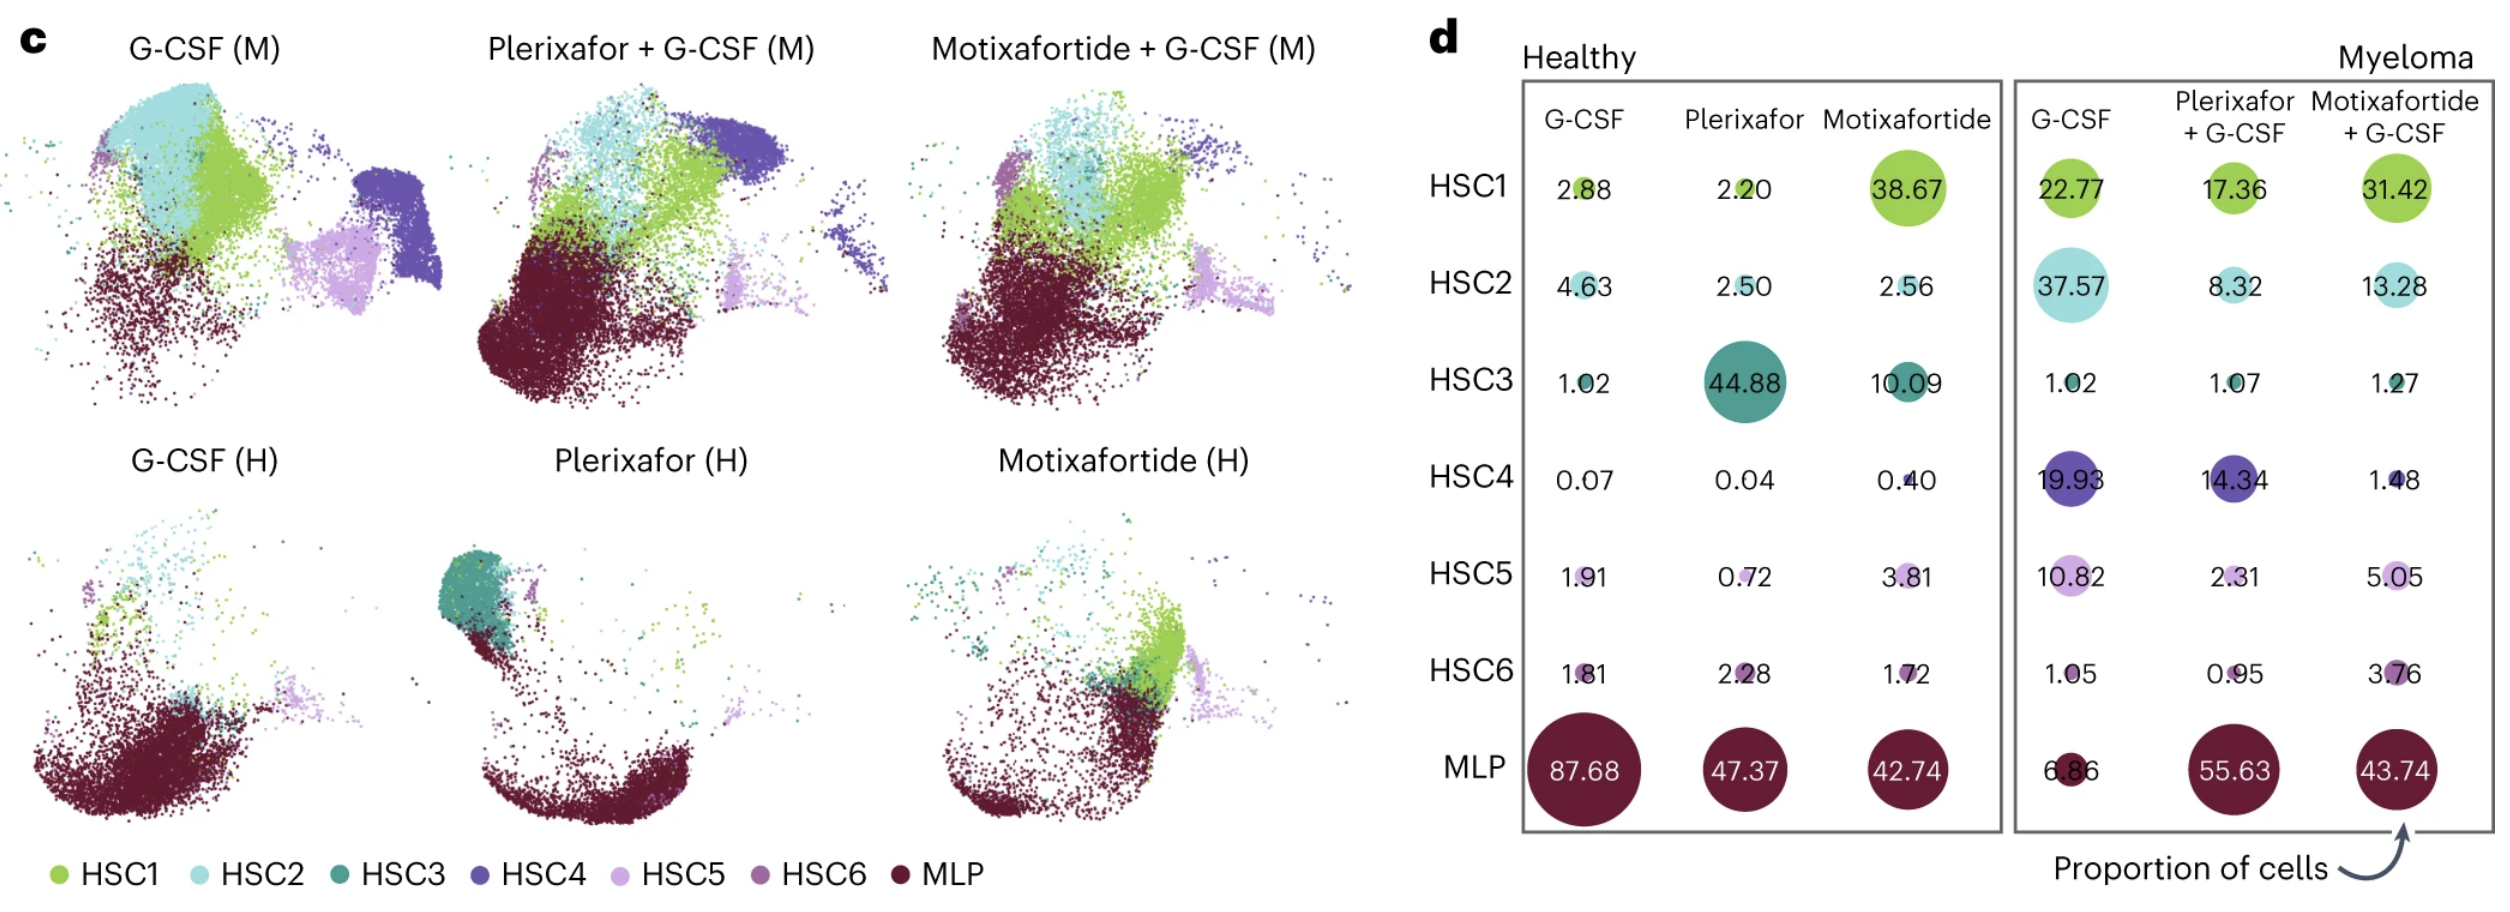 Figure 4C from Crees et al. shows UMAP plots of early progenitor populations (HSC1–6, MLP) across each cohort and mobilization regimen, with each cell colored by cell-type annotation and separated by mobilization regimen and cohort (M, multiple myeloma; H, healthy allo-donor). Figure 4D presents average cell-type proportions across each sample within each treatment group and cohort. Spot size indicates relative average expression, with the exact value overlayed.